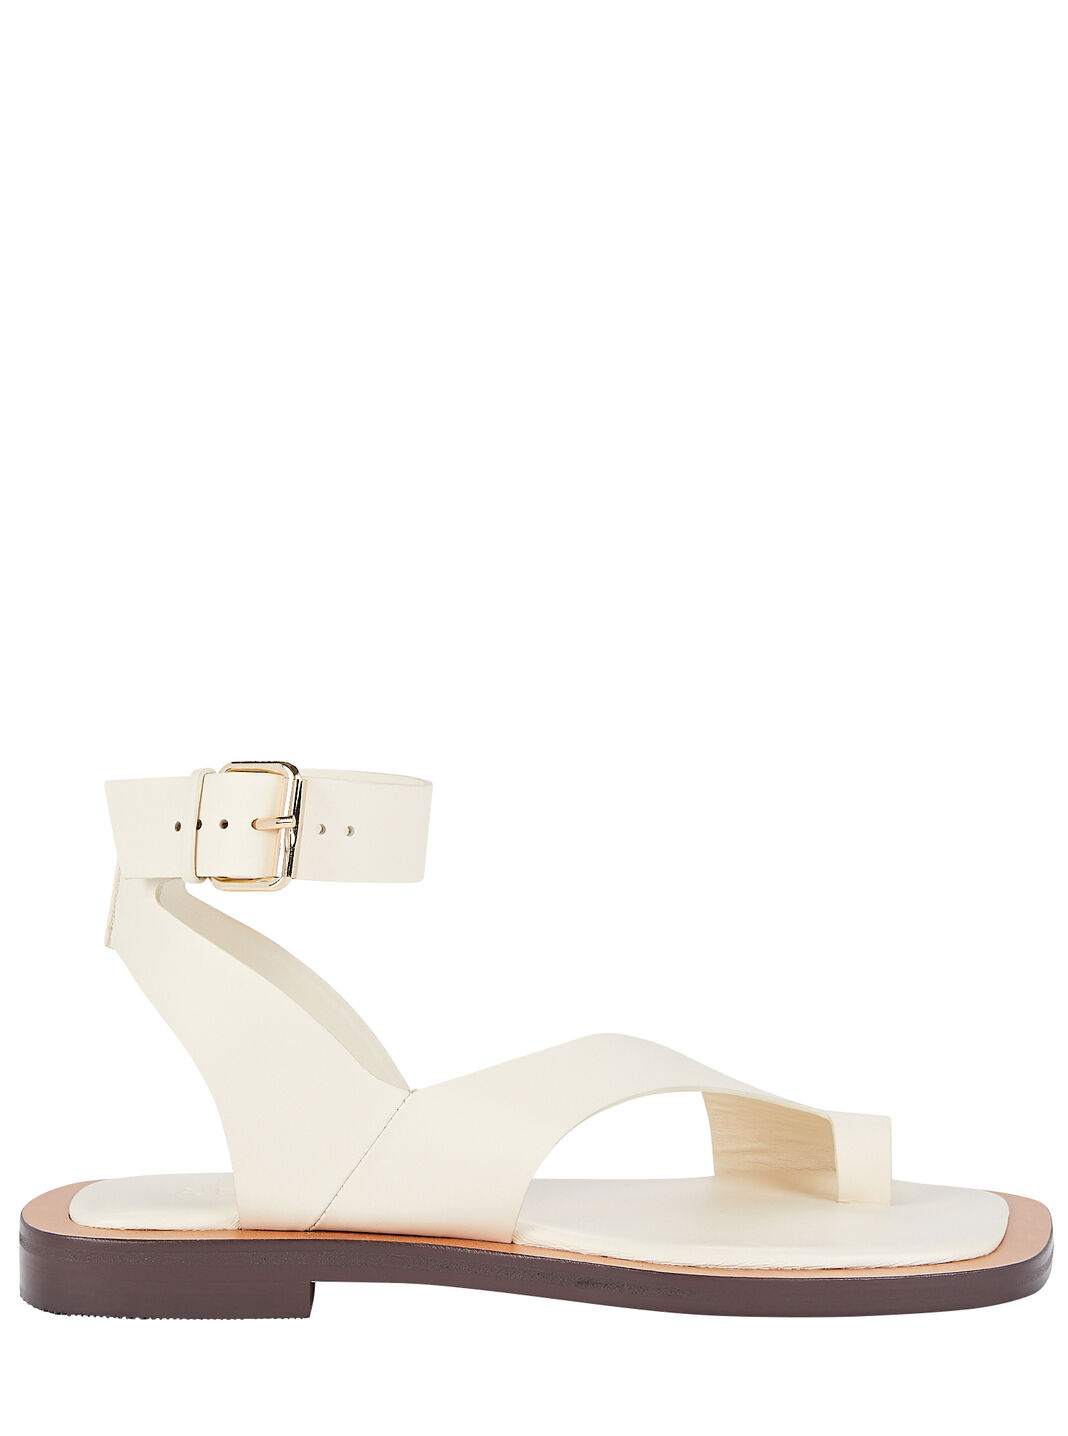 The Maeve Leather Sandals